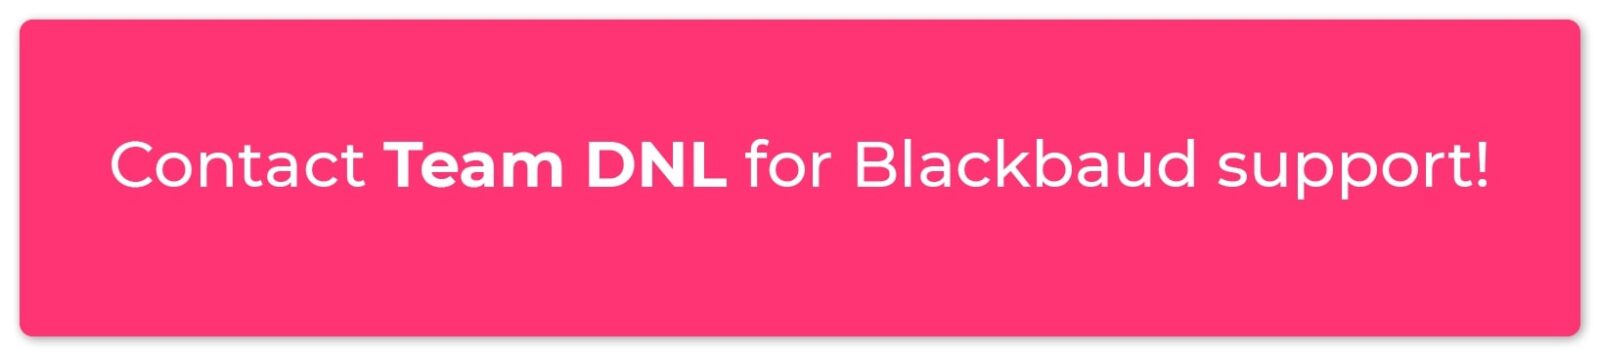 Click through to learn about Team DNL's Blackbaud support services!